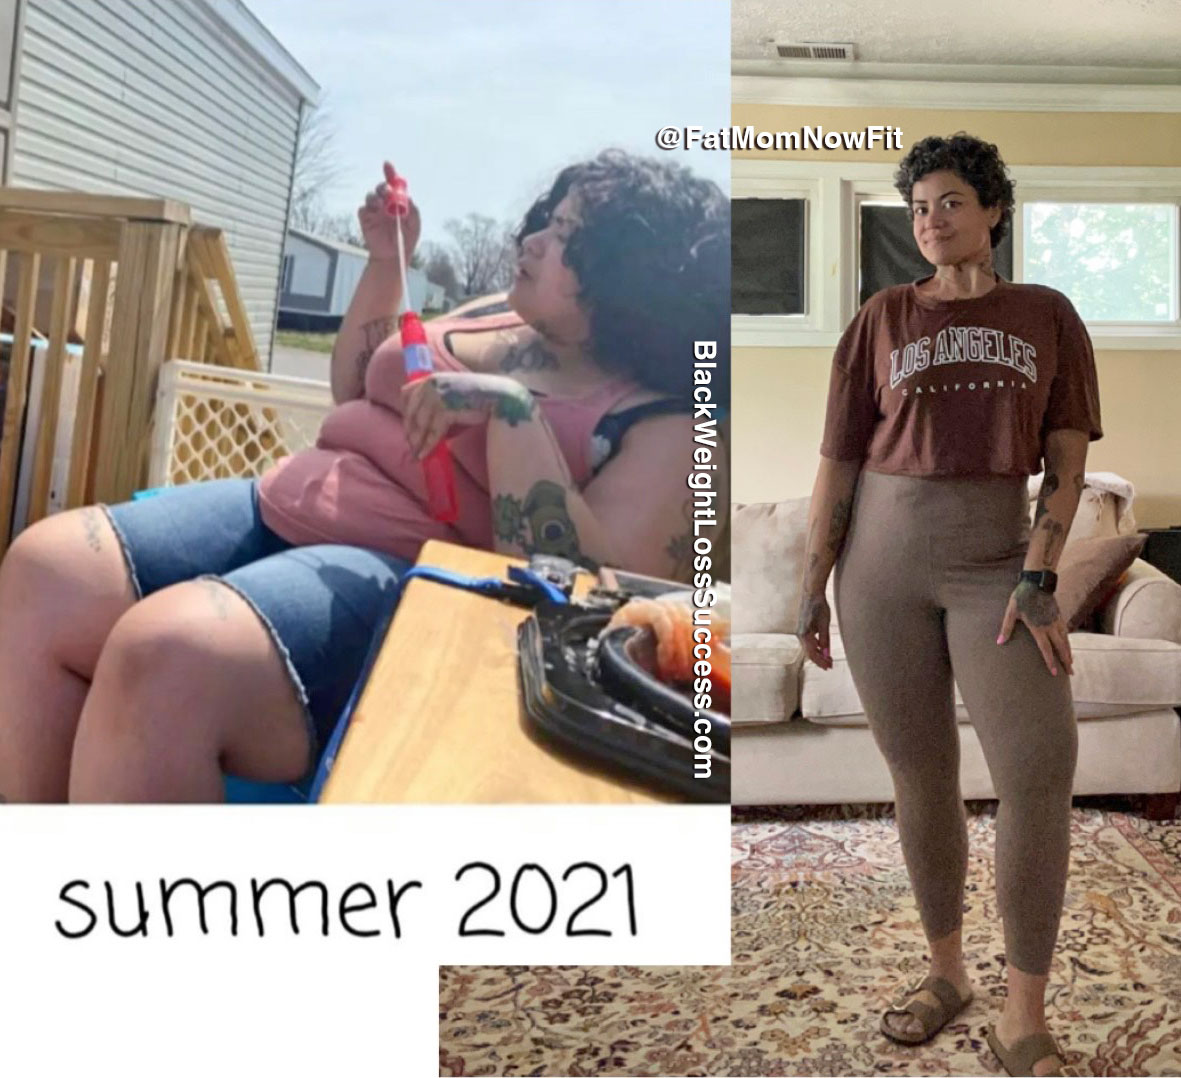 Sophia before and after losing 100 pounds